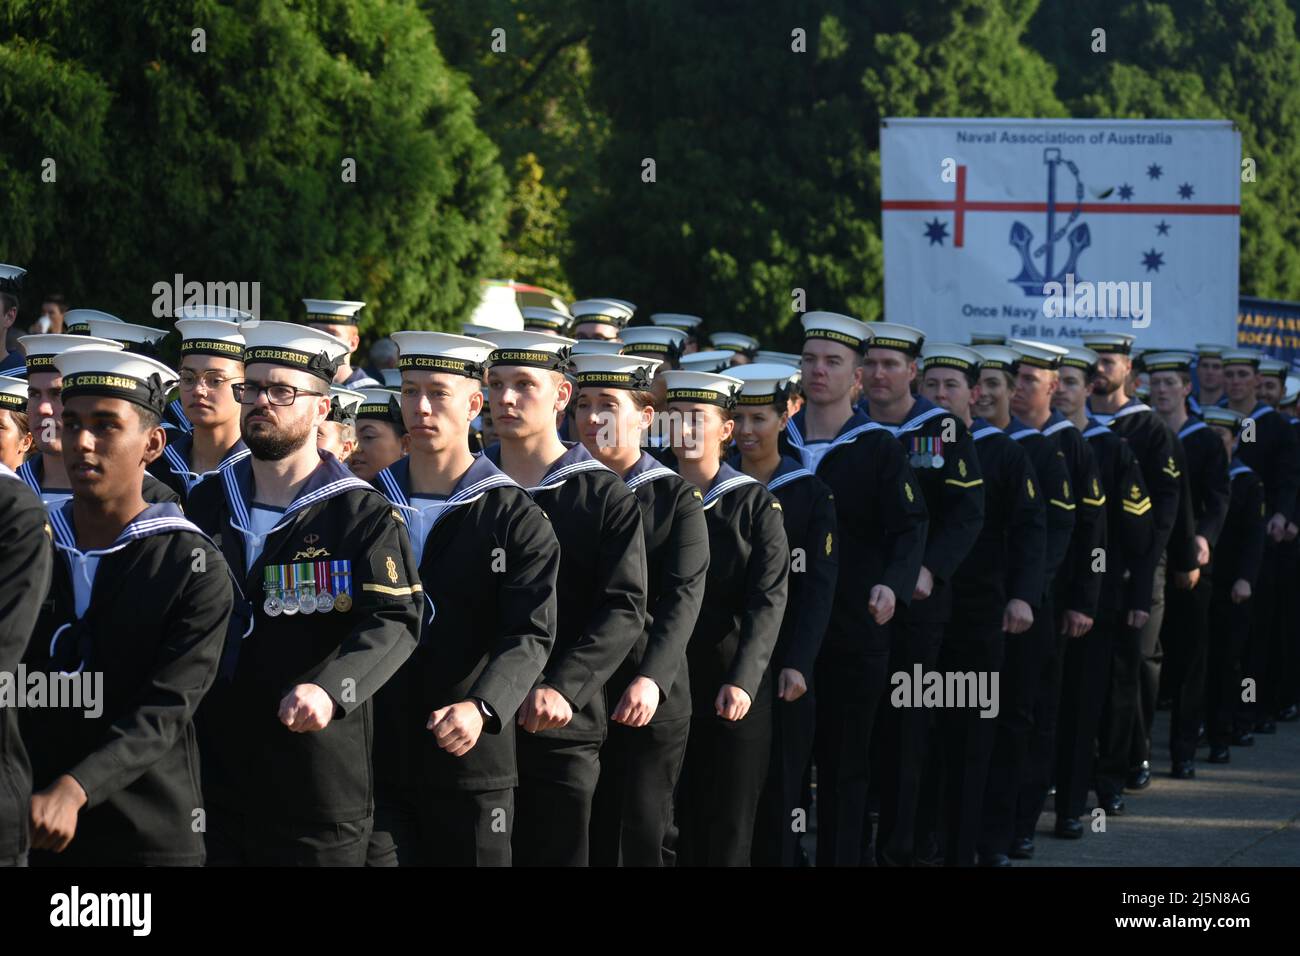 Melbourne, Australia. 25th April 2022. Members of the Naval Base HMAS Cerberus march towards the Shrine of Remembrance for the Anzac Day parade. Credit: Jay Kogler/Alamy Live News Stock Photo